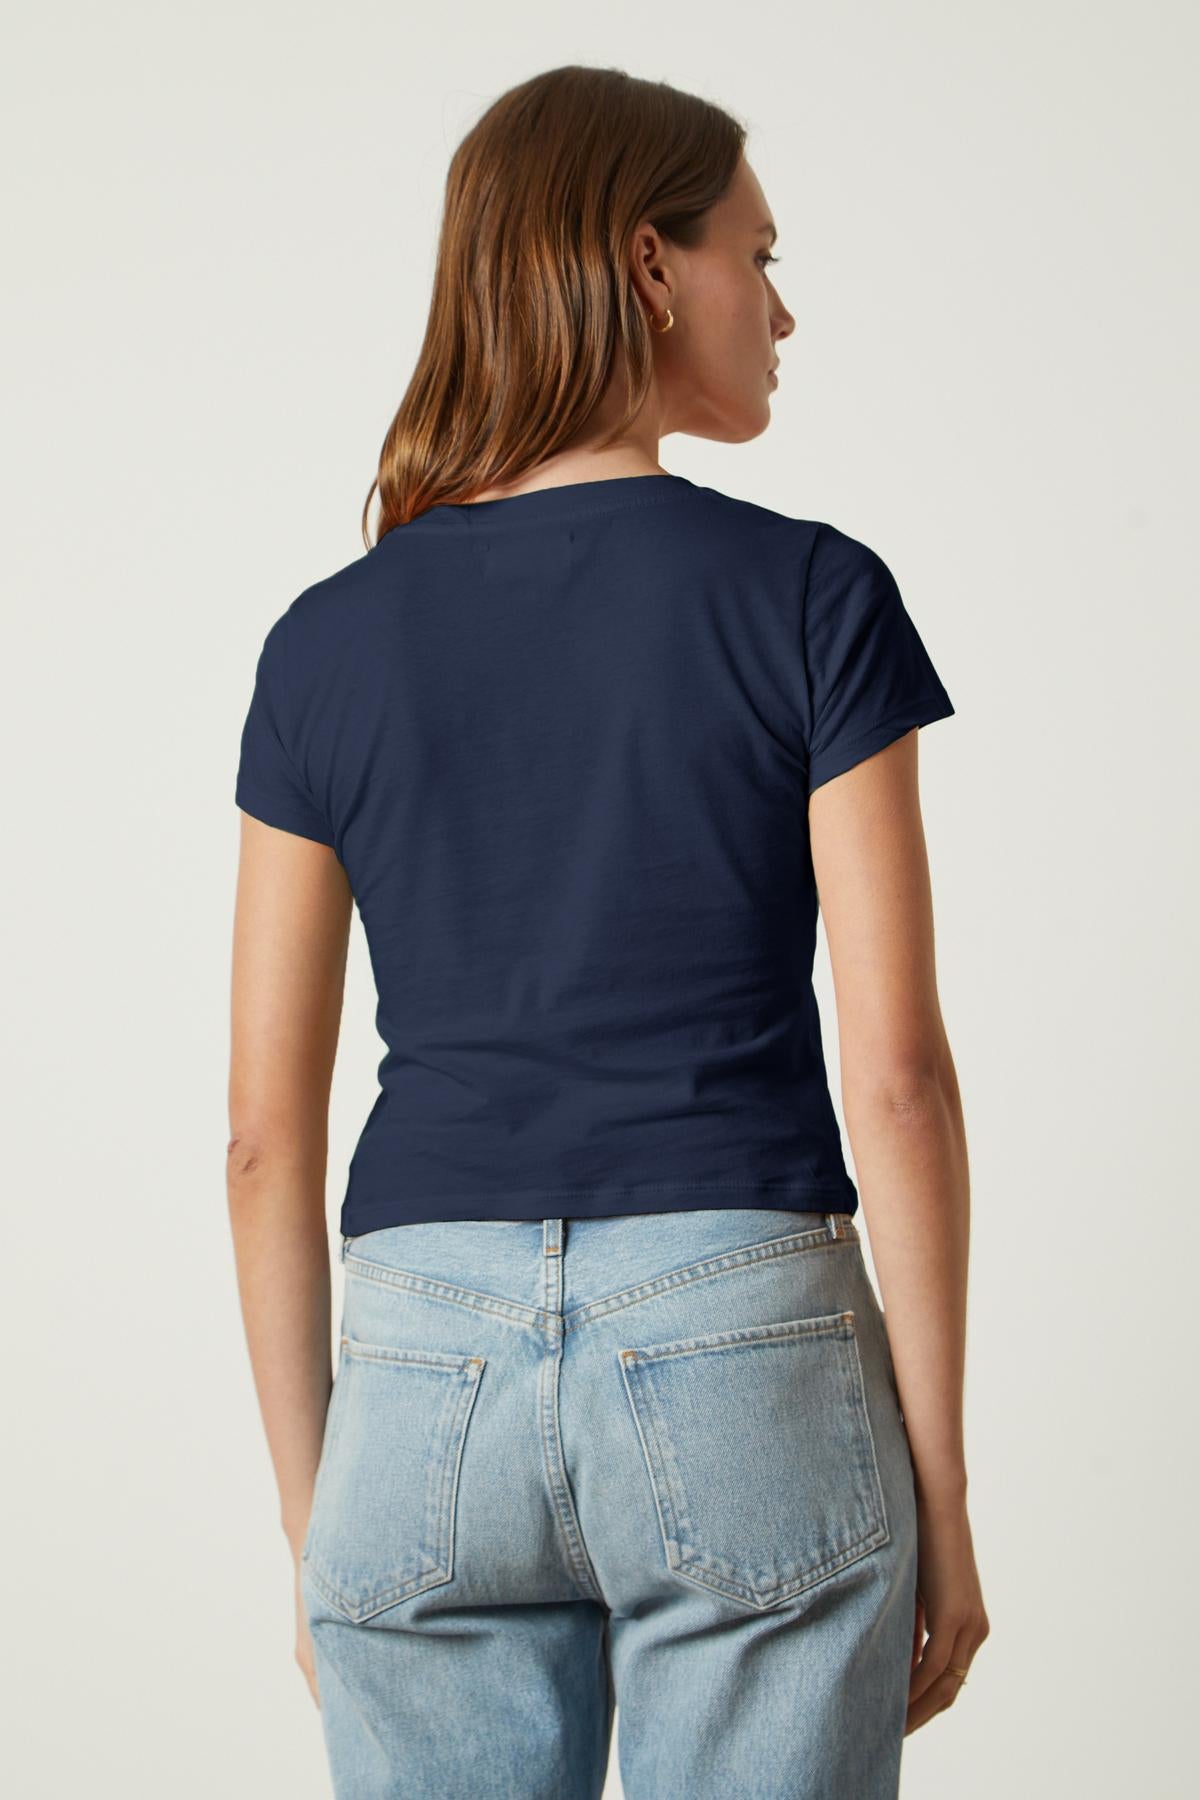 A woman wearing jeans and a navy Velvet by Graham & Spencer NINA CROPPED CREW NECK TEE, giving a sartorial throwback.-35201179549889